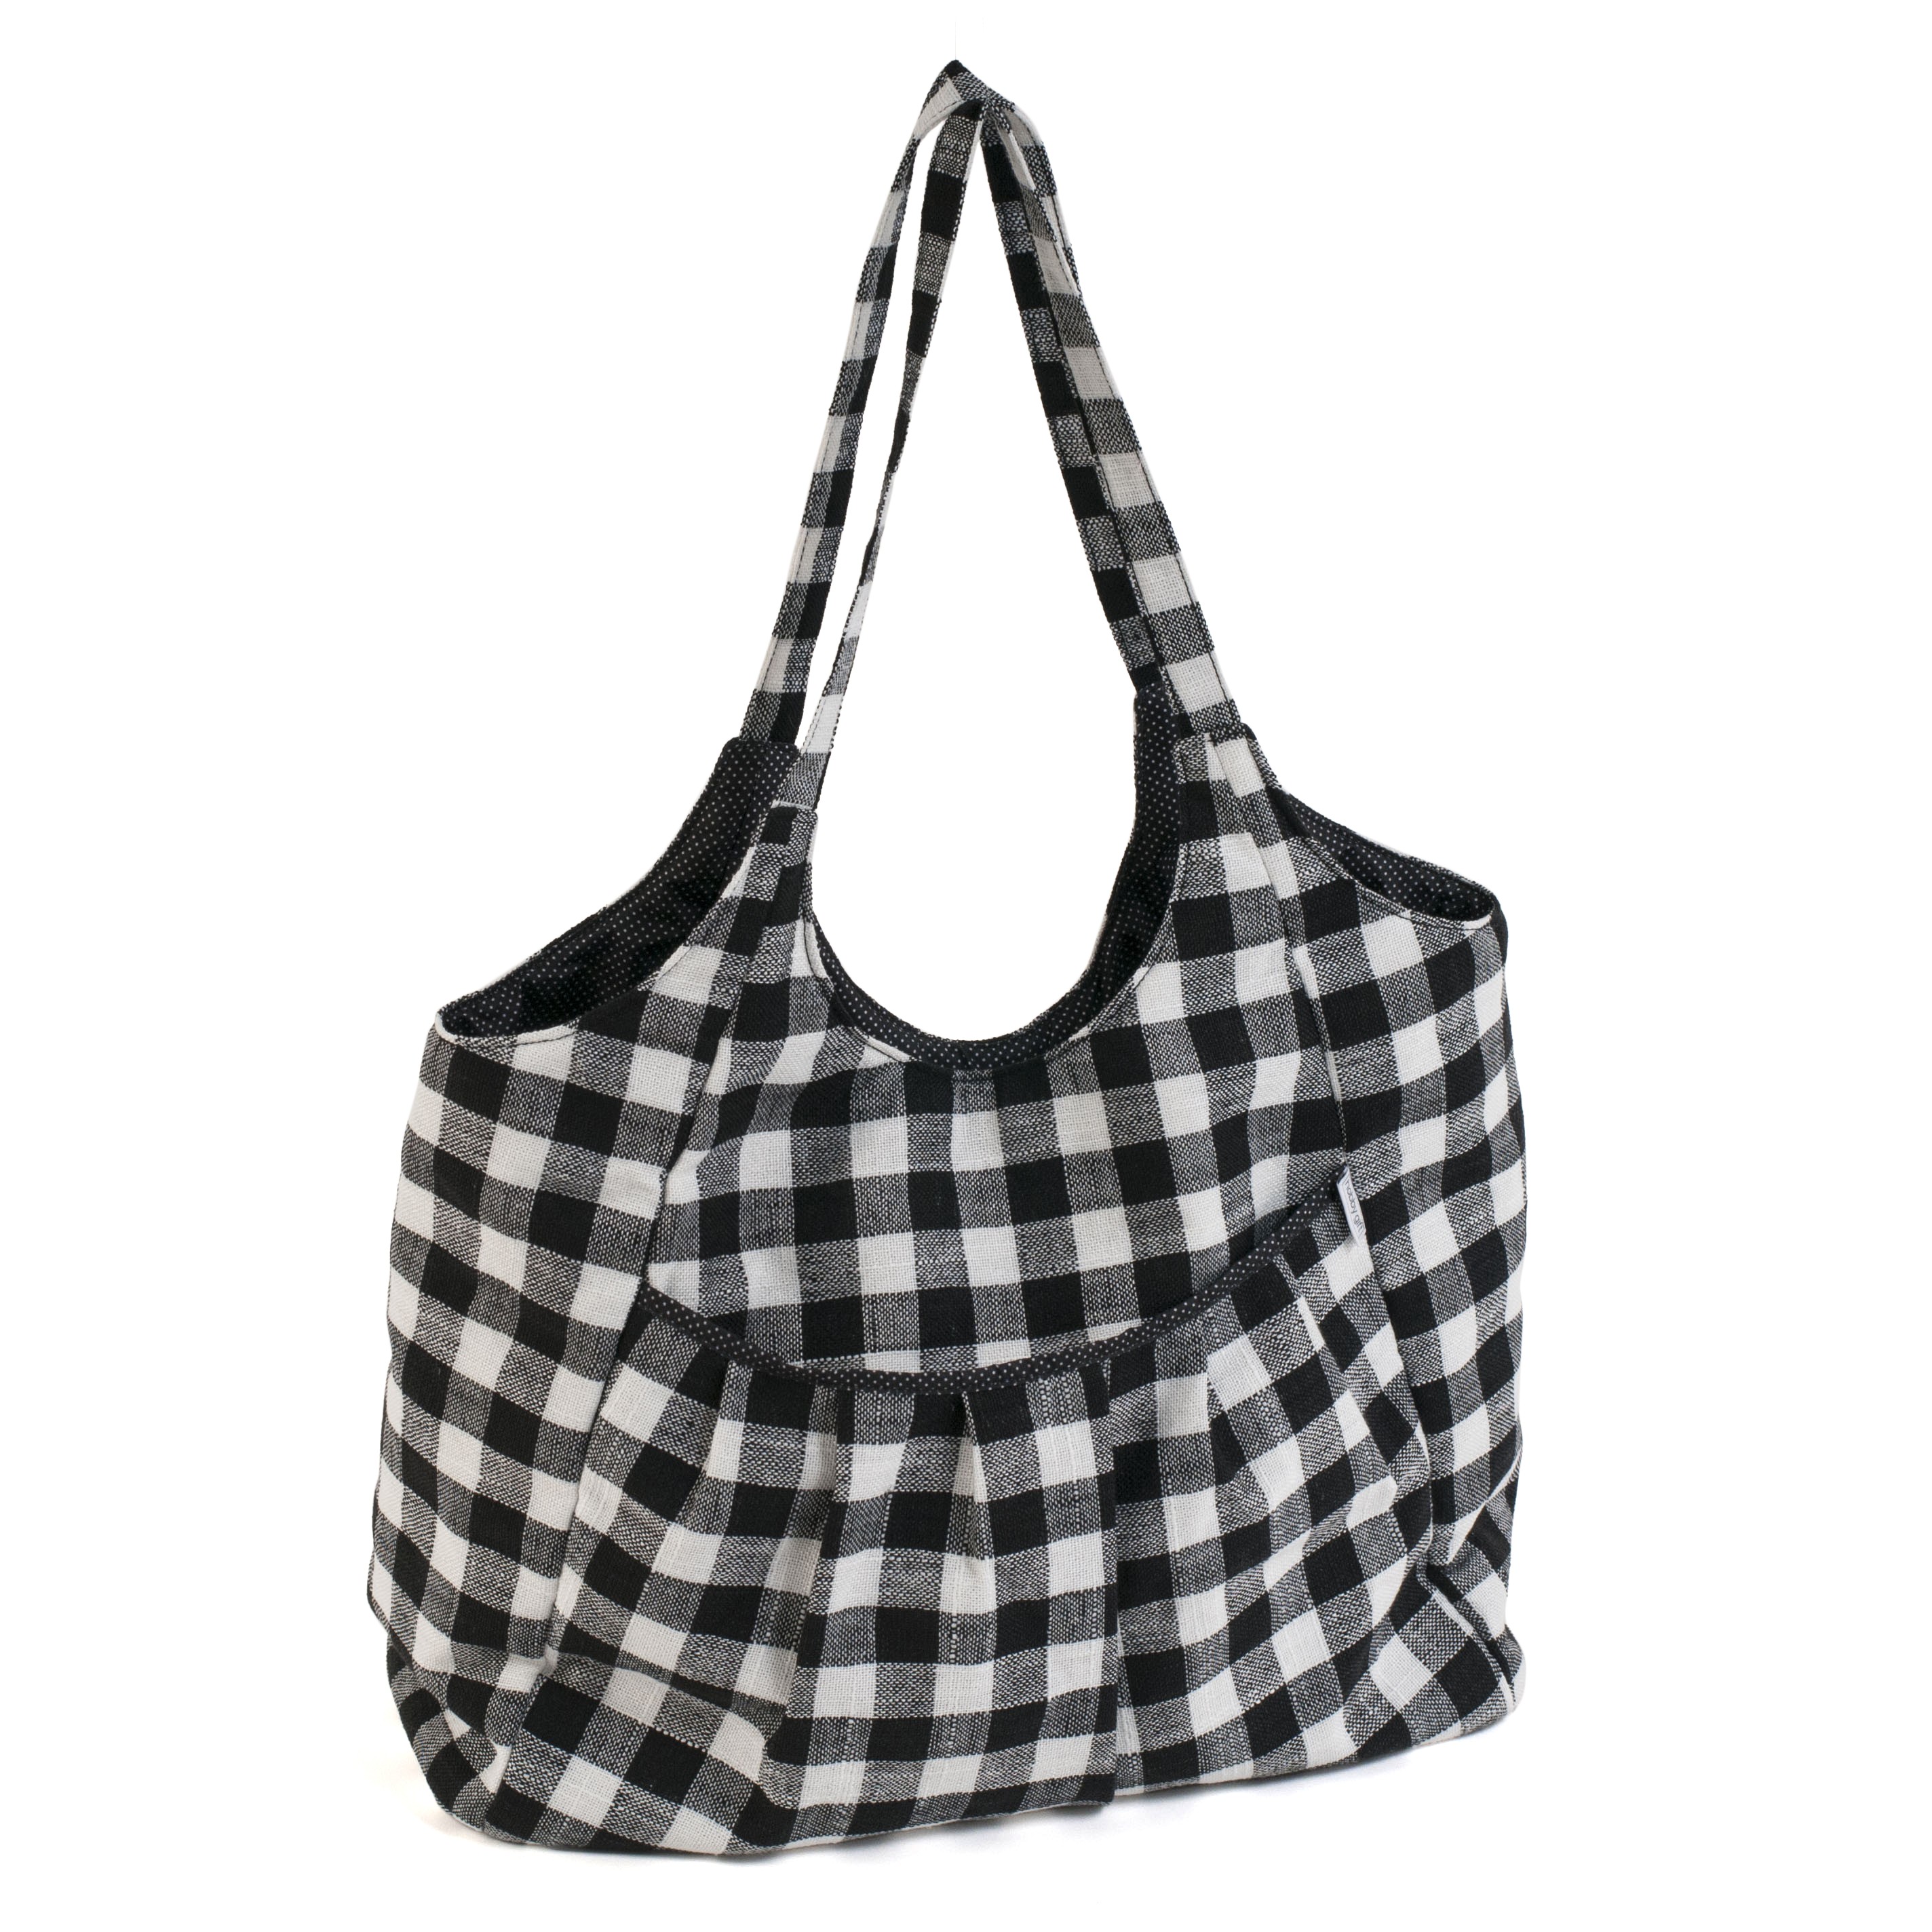 Craft Bag: Shoulder Tote: Monochrome Gingham - Free Matching Sewing Box with a tote bag purchase*